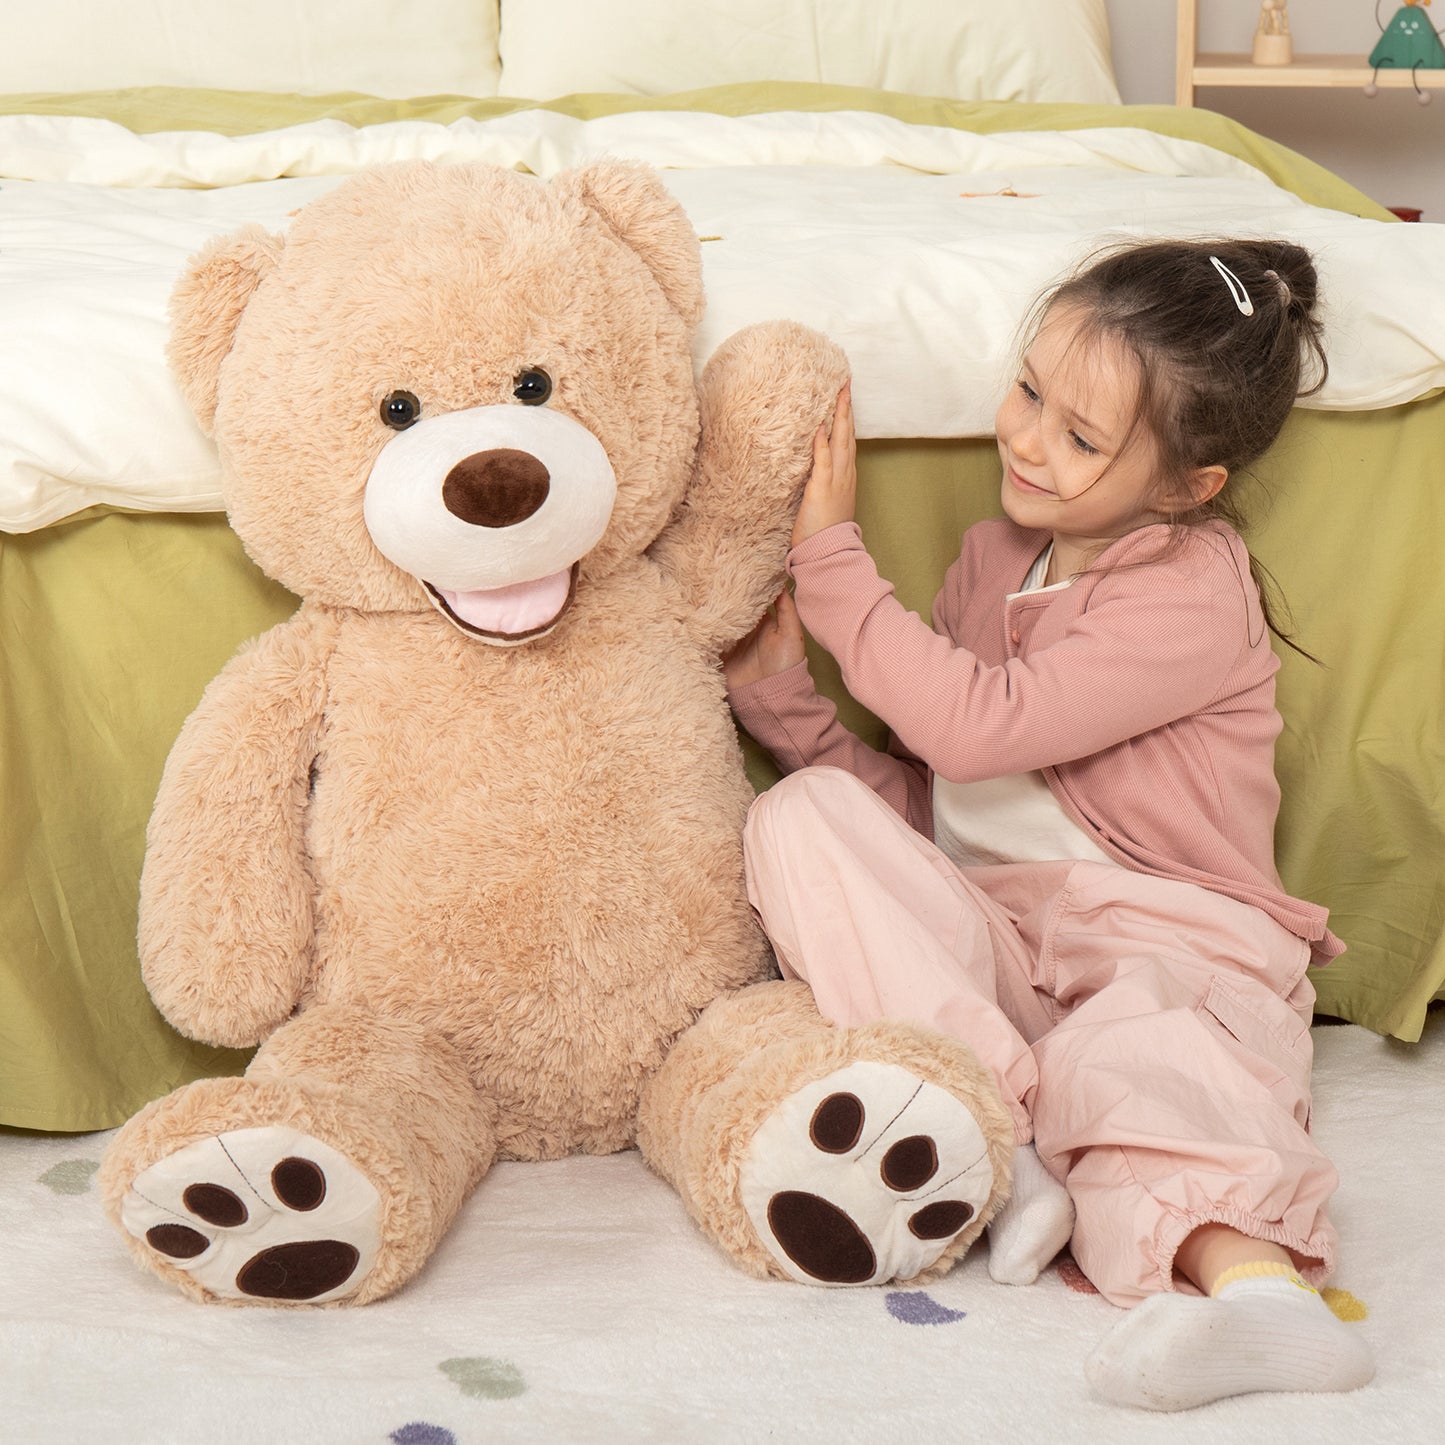 Big Smile Teddy Bear Plush Toy, Light Brown, 39 Inches